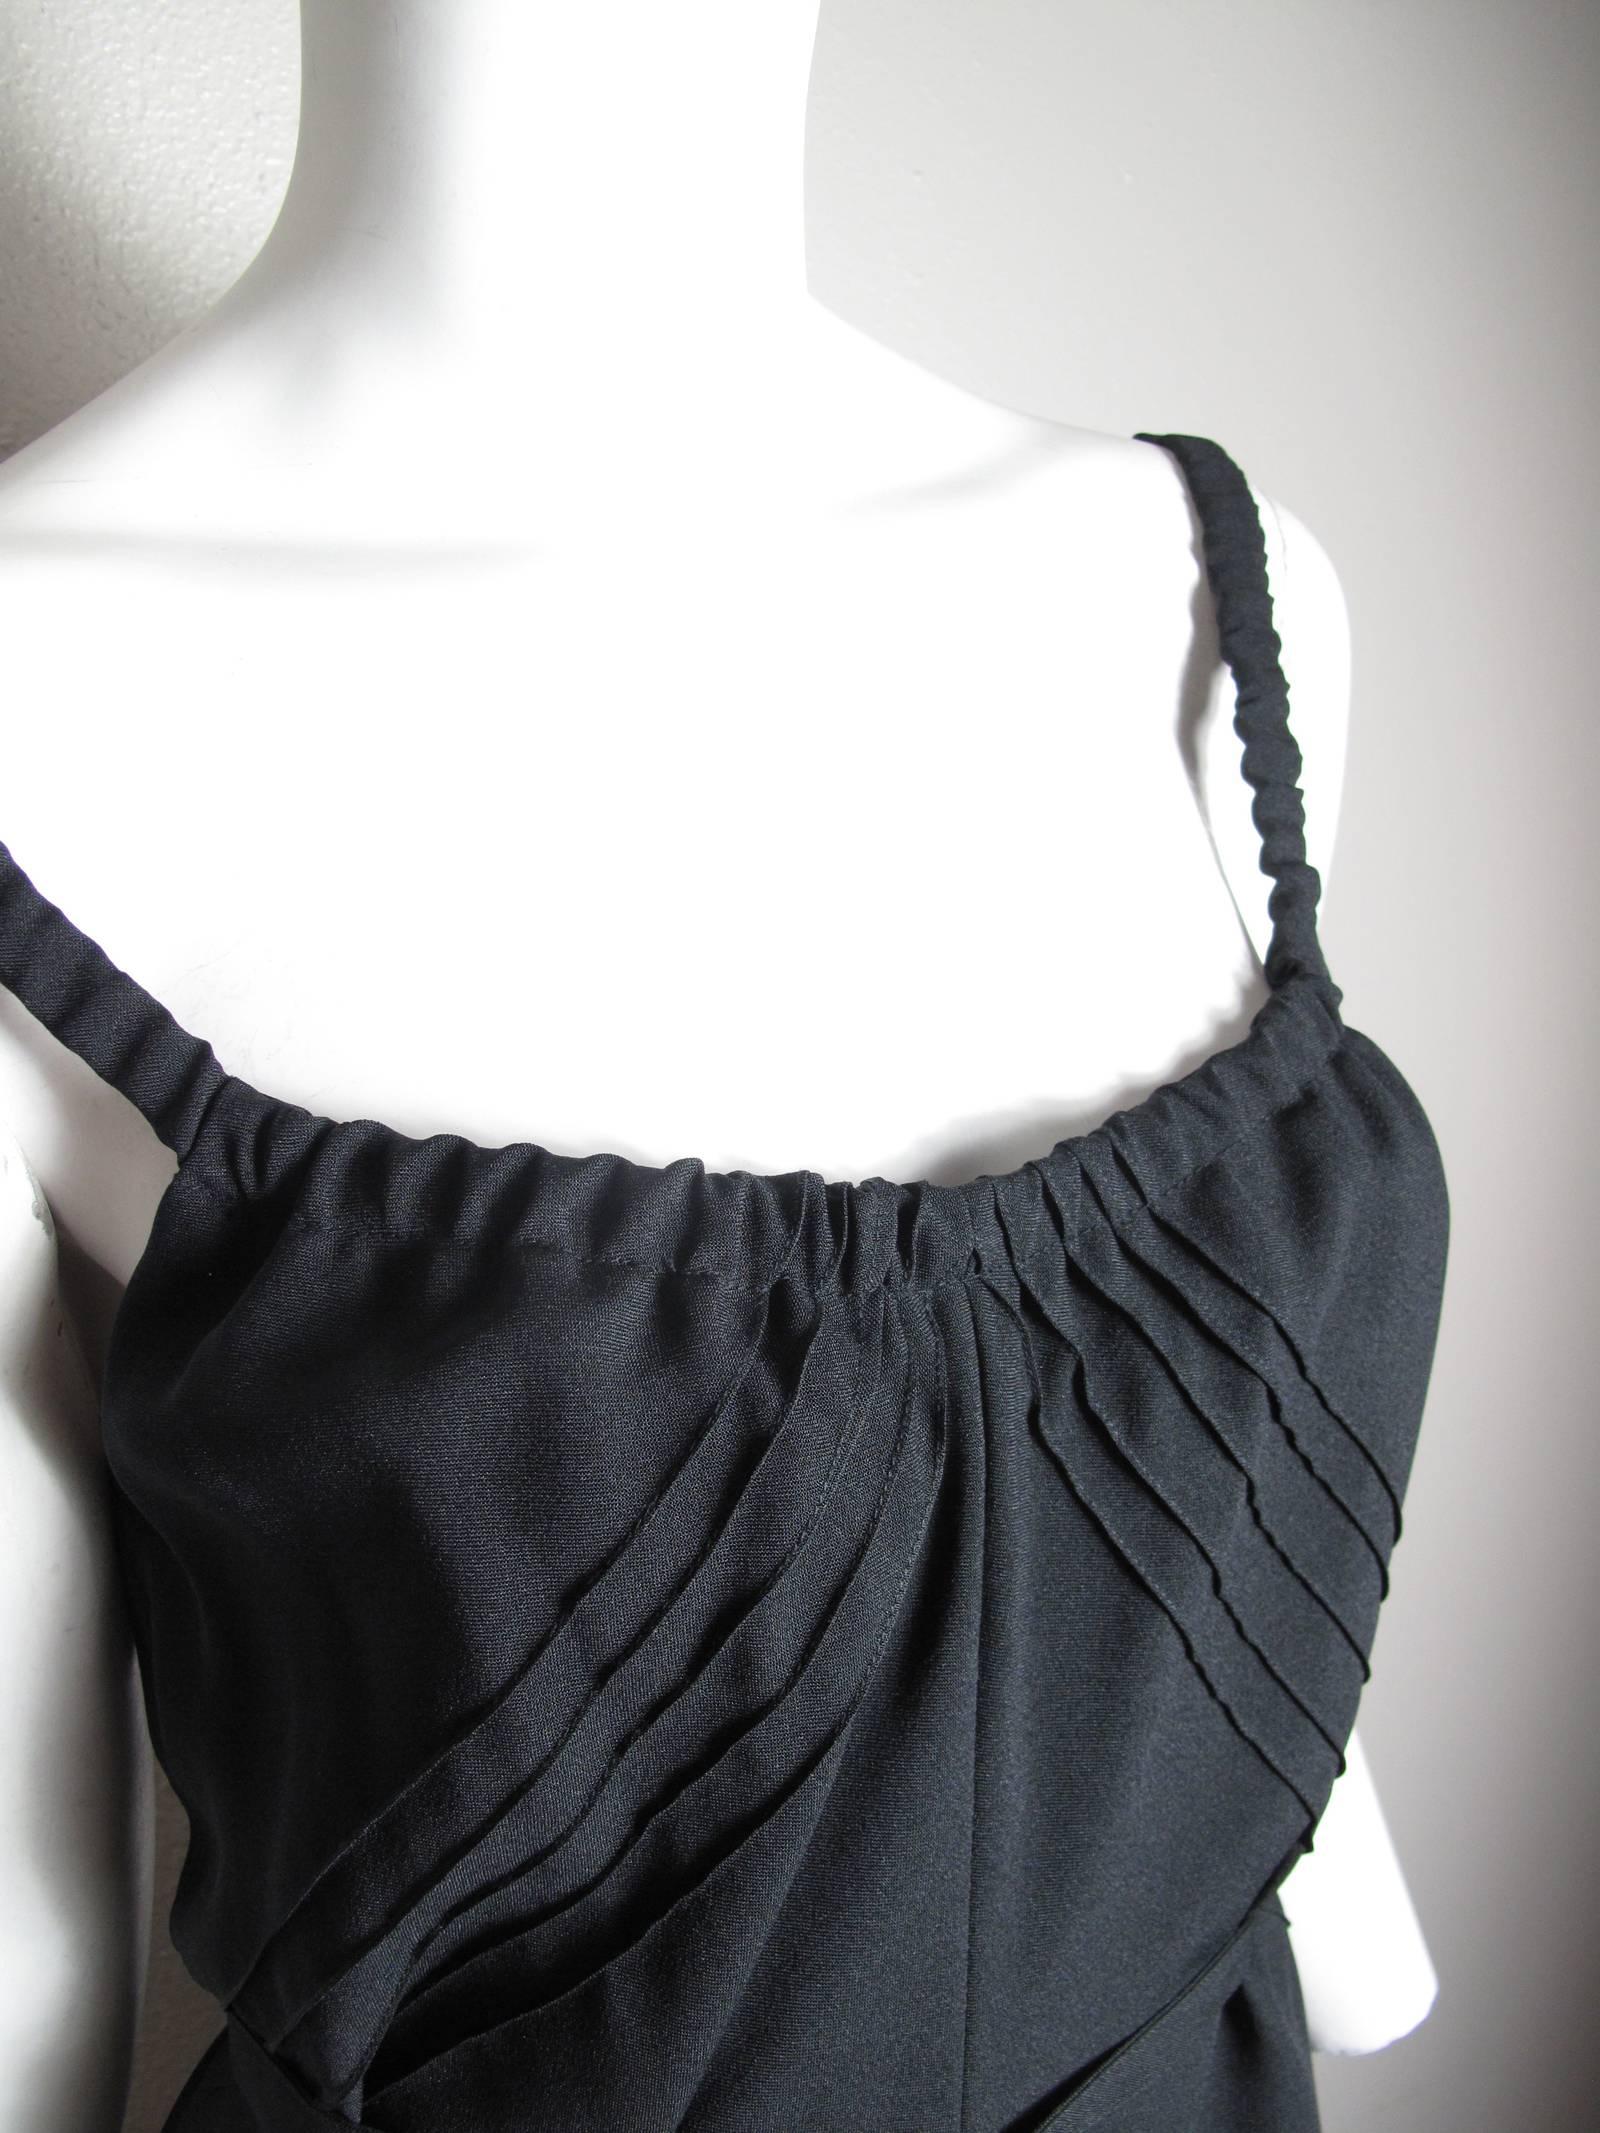 Nipon boutique black dress with ruffle trim and elastic straps.  Condition: excellent. Size 8

We accept returns for refund, please see our terms.  We offer free ground shipping within the US.  Please let us know if you have any questions.